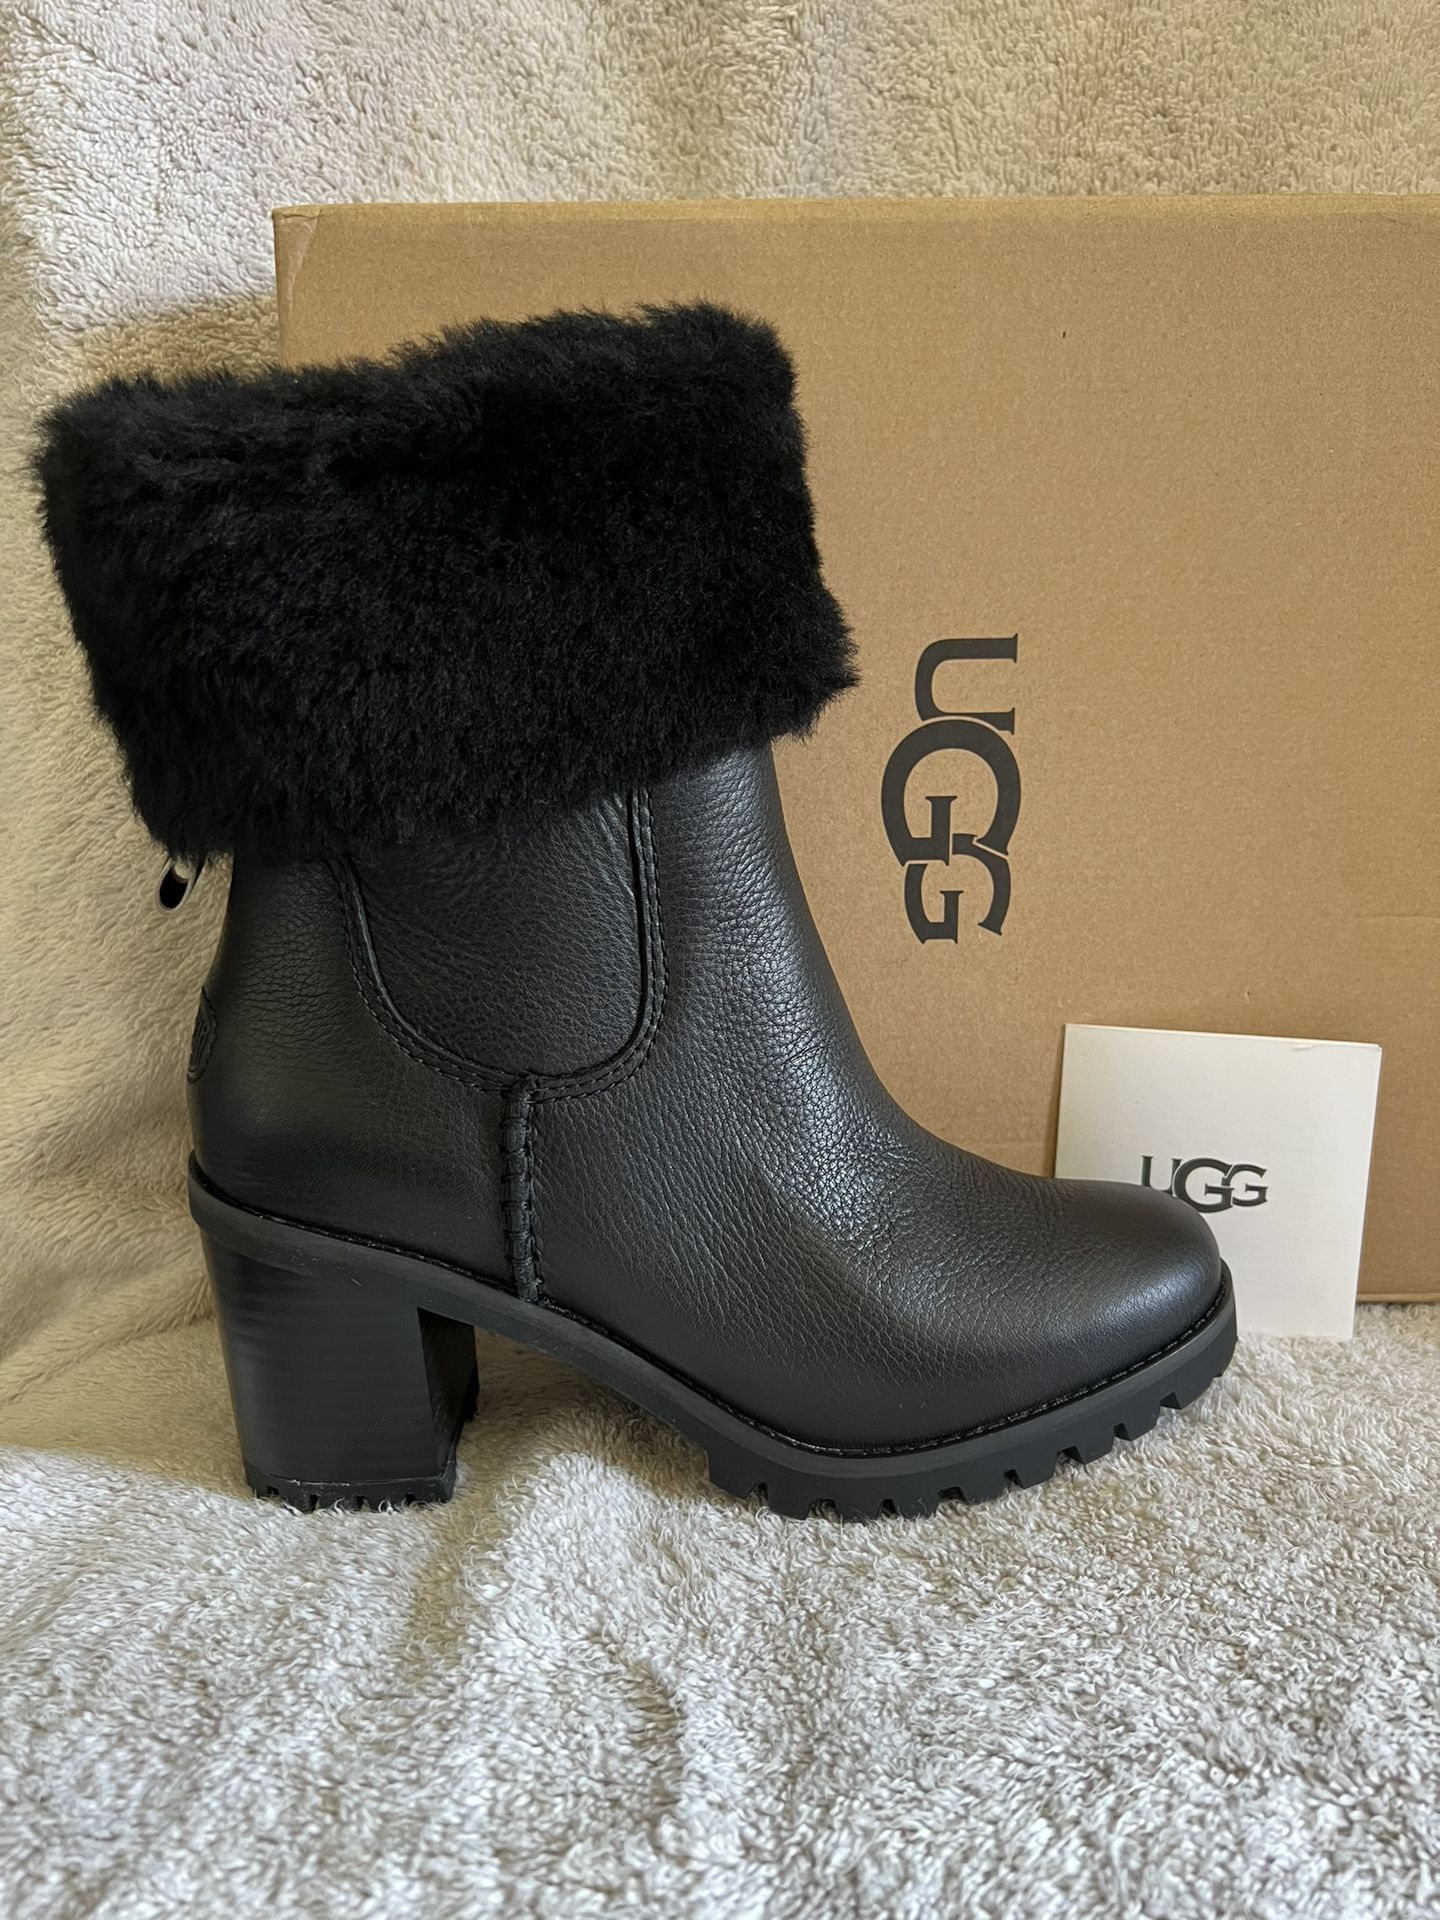 New Ugg’s Woman’s Lupine Fashion Boots Size 7 And 9.5 Black 